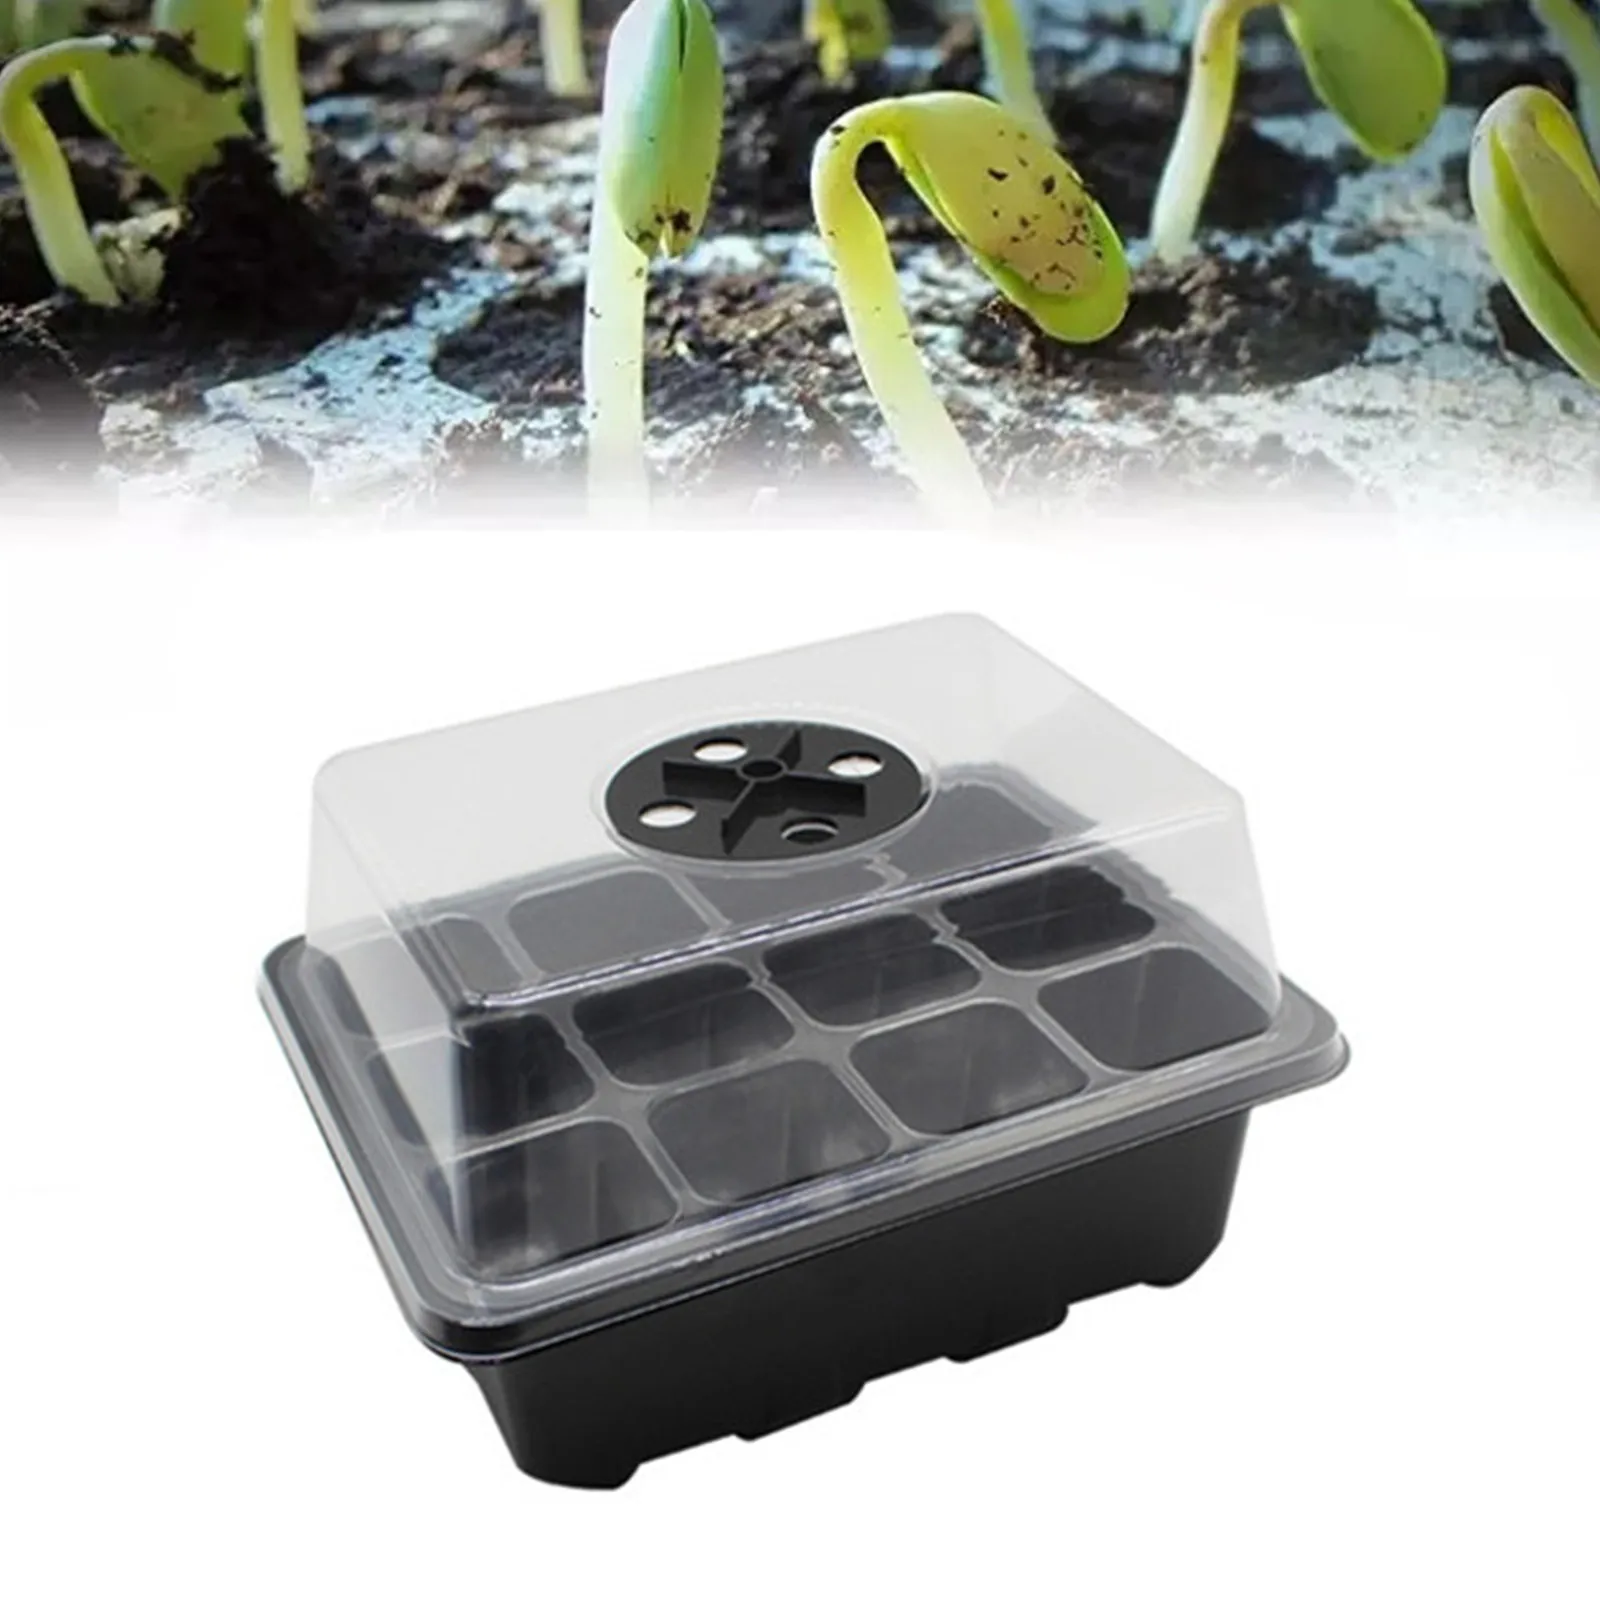 

Mini Greenhouse Nursery Pot Box with 12 Cells Seed Sprouter Tray Seed Germination Box Seedling Growth Bin with labels diggers